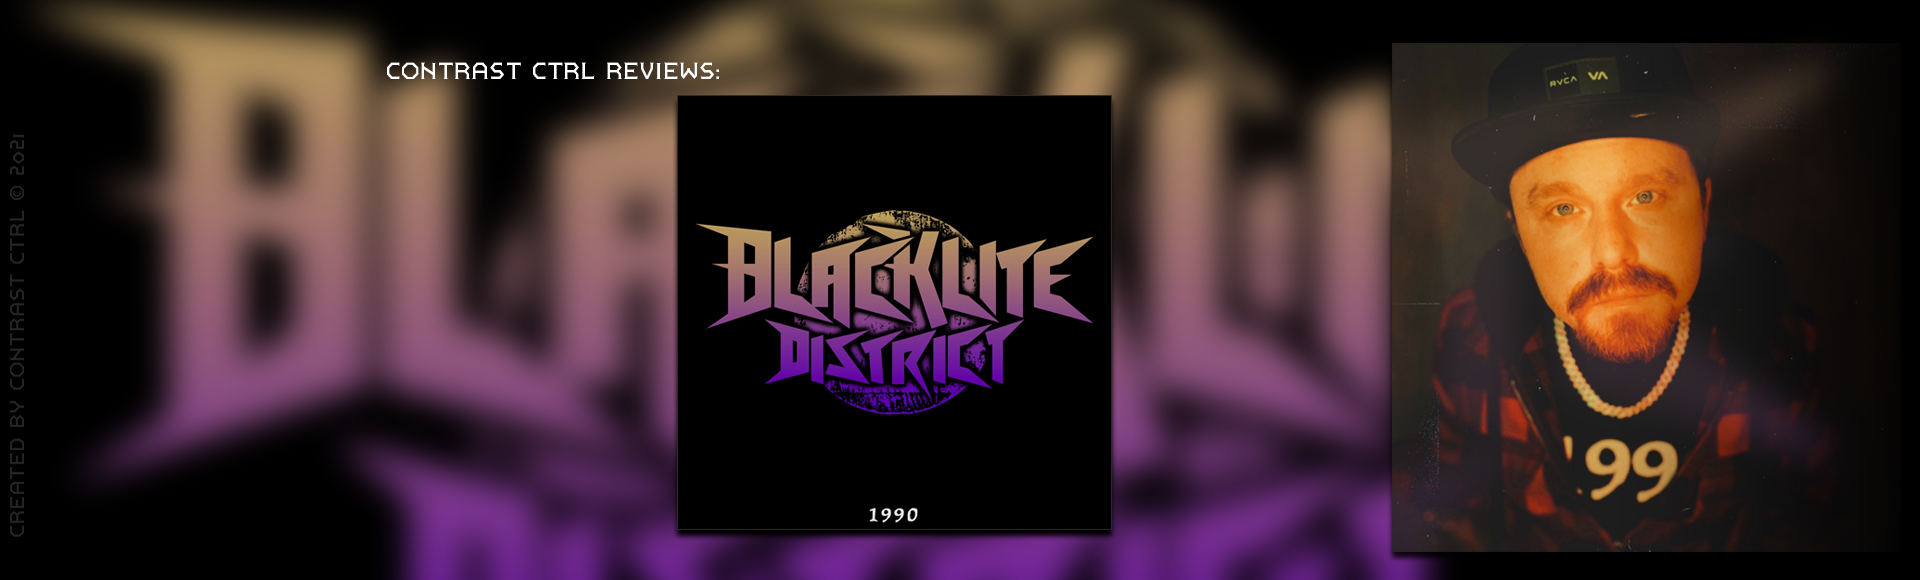 Review: ‘1990’ by Blacklite District